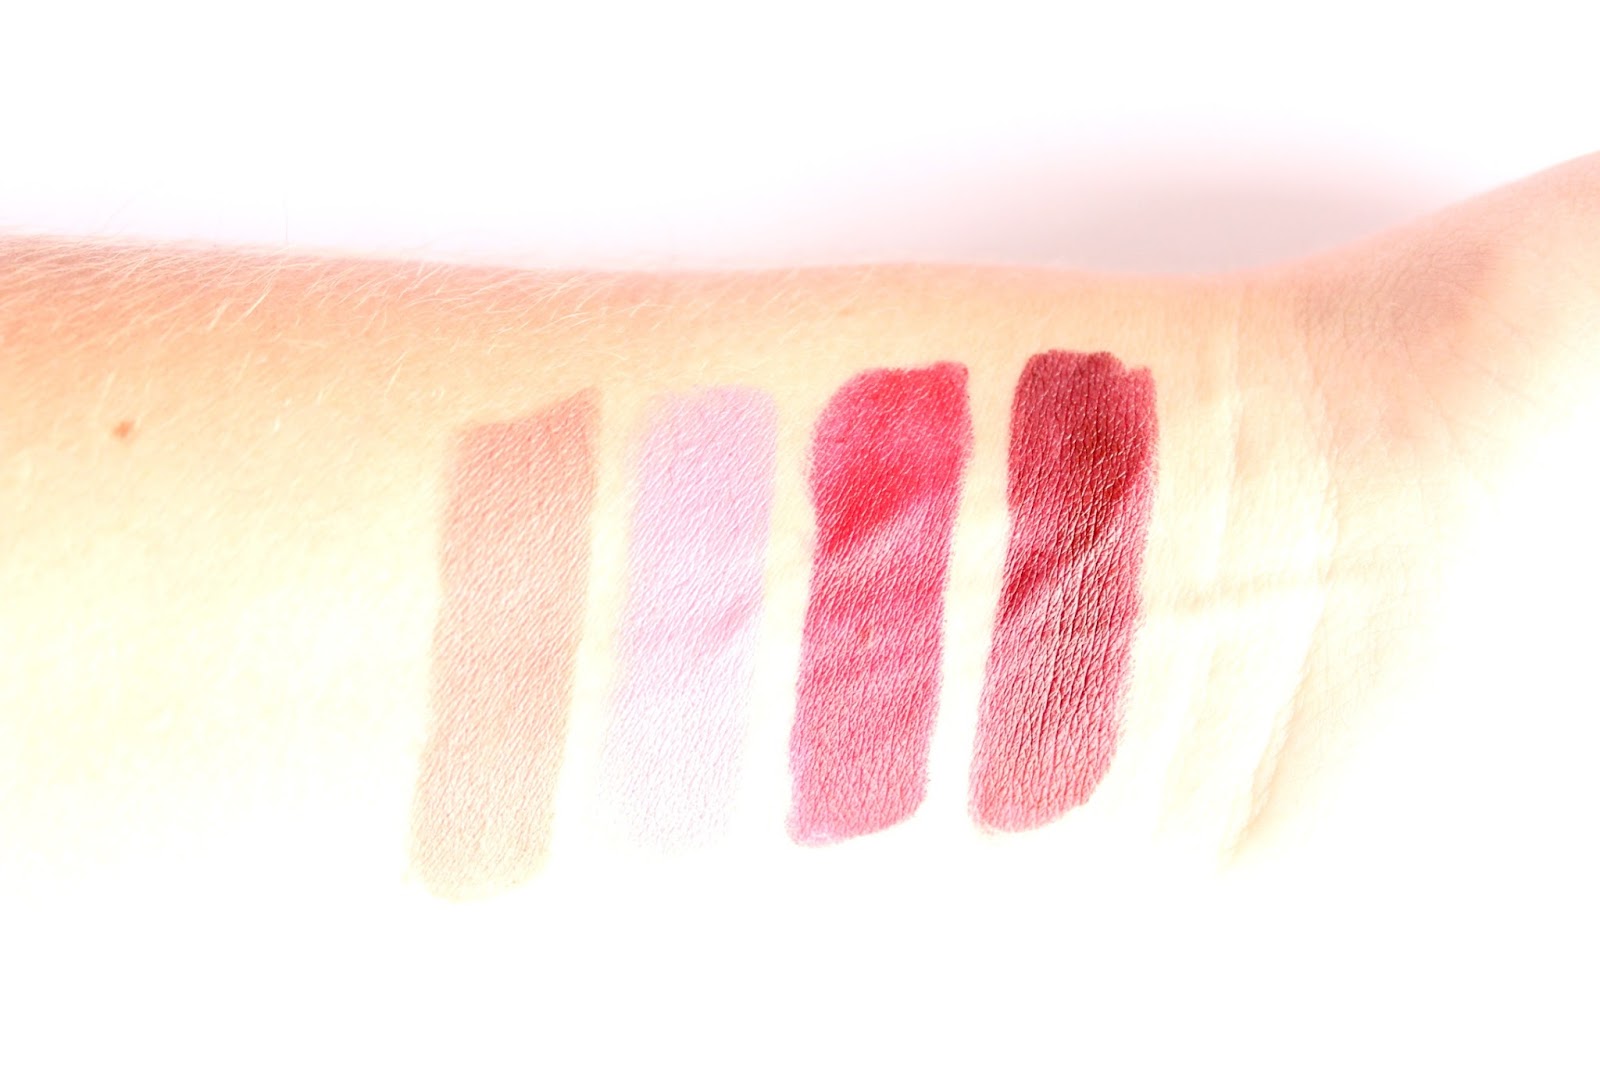 Maybelline Color Sensational Creamy Mattes NEW SHADES Autumn 2016 SWATCHES